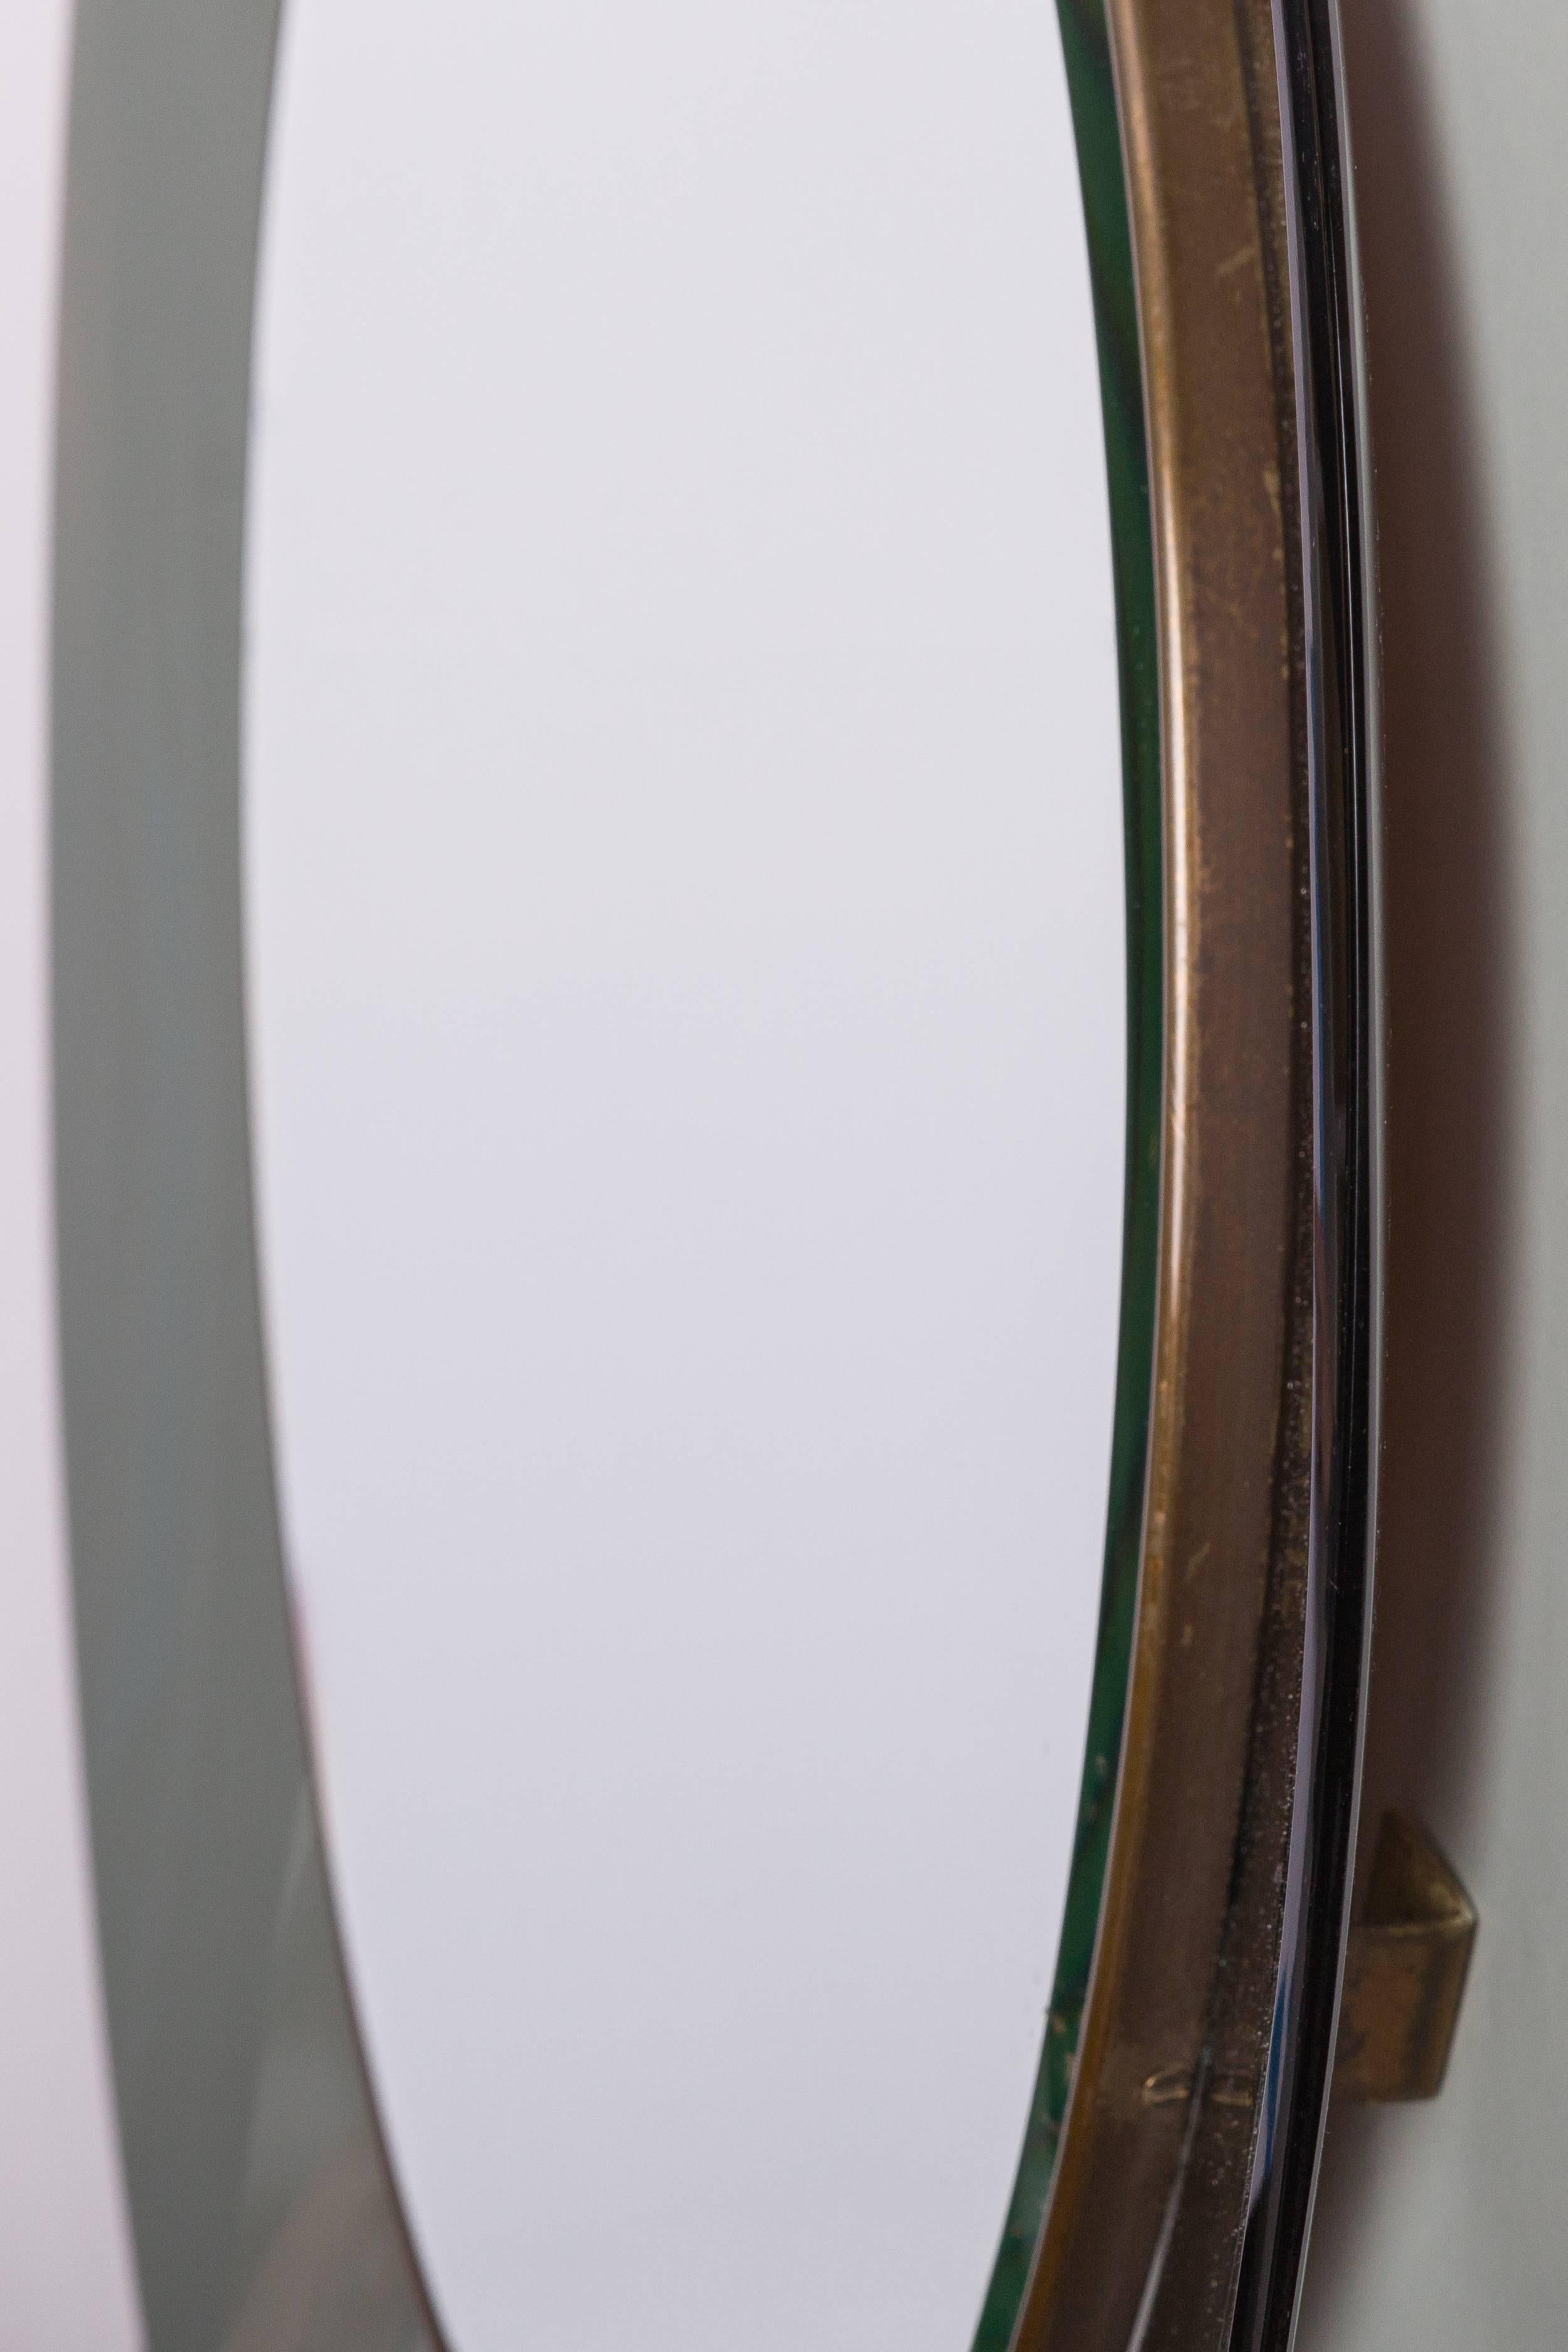 Max Ingrand for Fontana Arte  classic and elegant gray-green colored, curved and beveled glass framing mirrored glass encased in brass trim, Italy, dated on the back '1966.'

Literature:
Quaderni Fontana Arte 2, 1962
Domus, no. 424, March